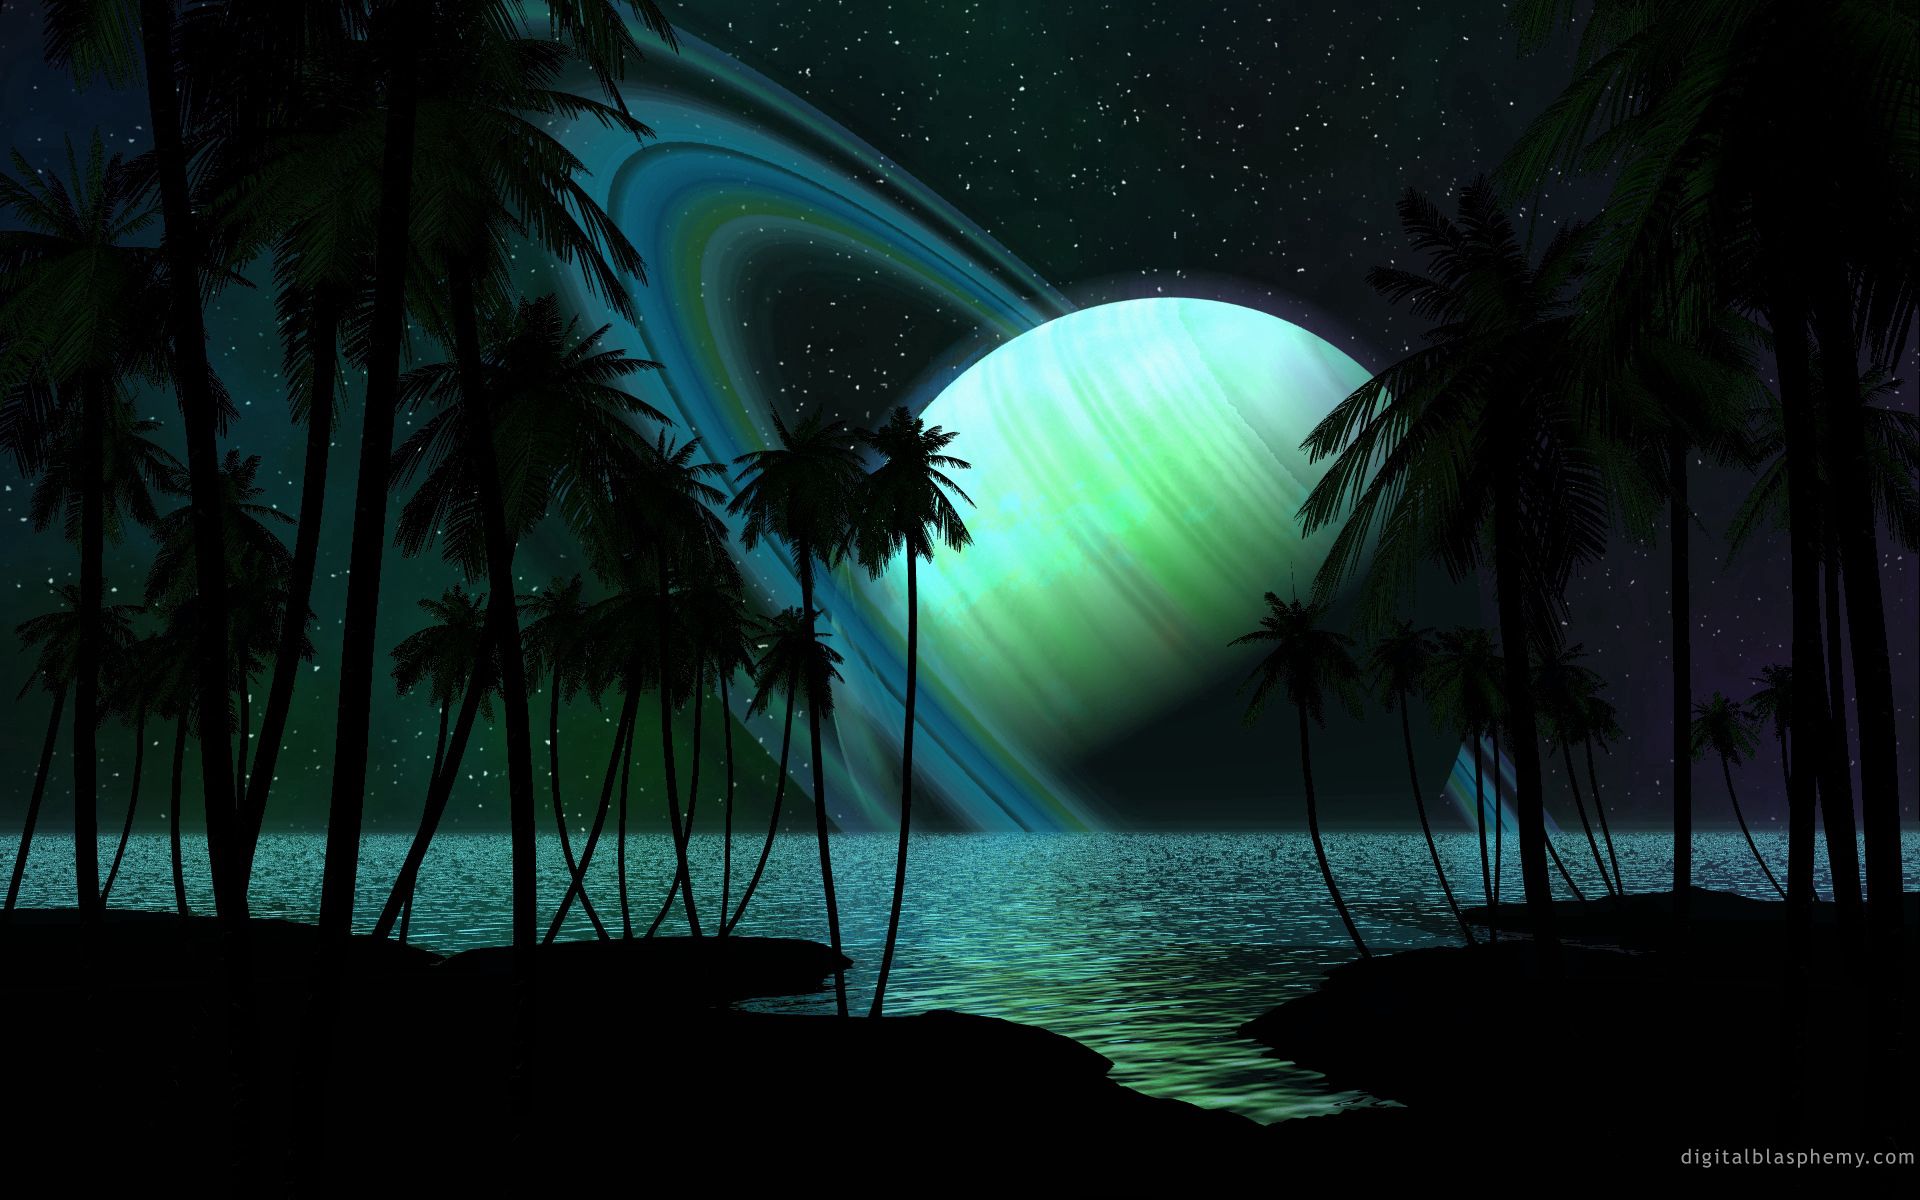 universe, water, palms, darkness, fiction, that's incredible, saturn images